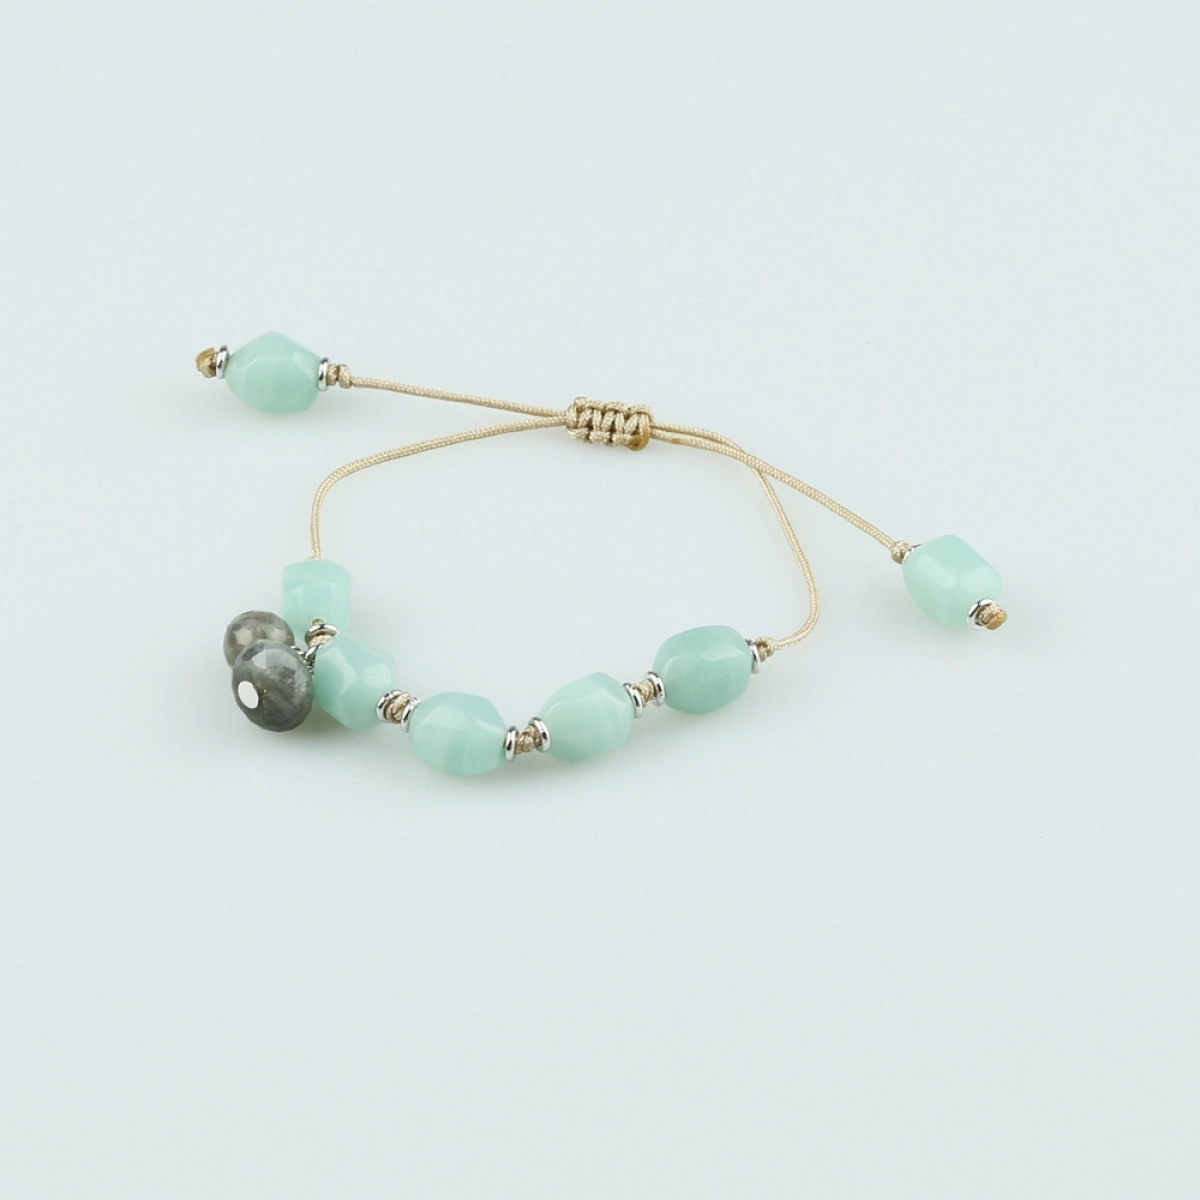 BRACELET KNOTTED AMAZONITE WITH LOOSE KNOT BUFPU66A PATRICIA GARCIA